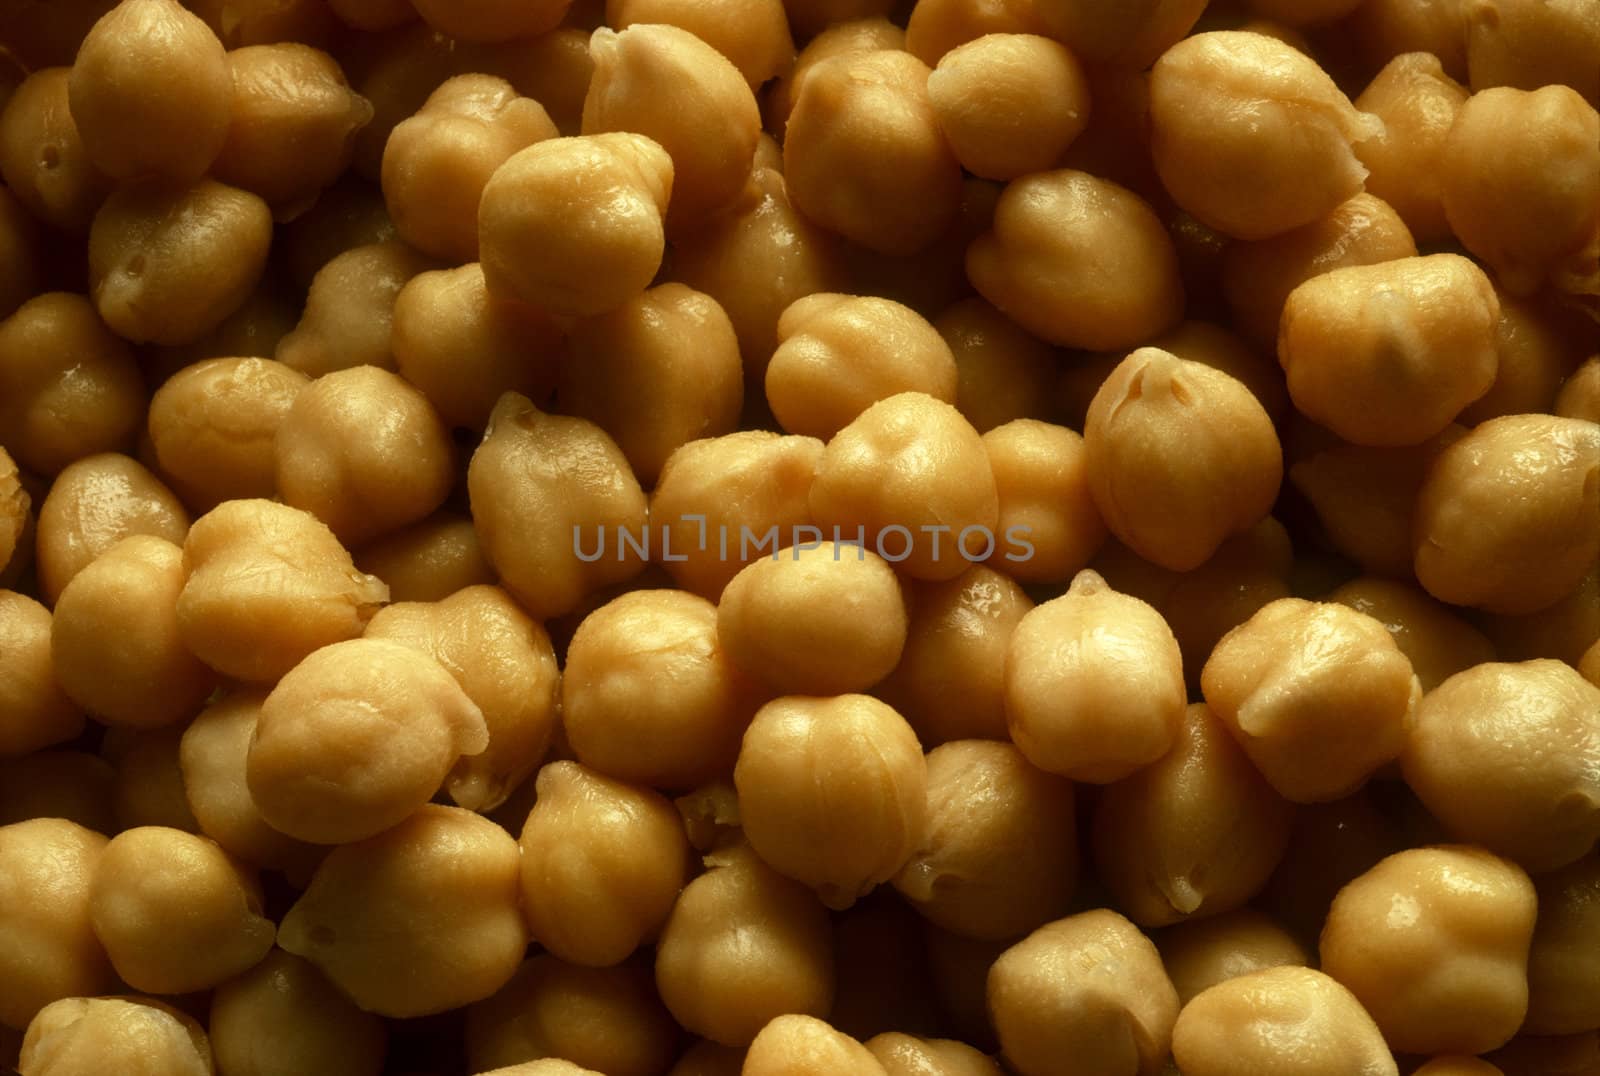 Yellow Legumes known as Garbanzo Beans or Chick Peas